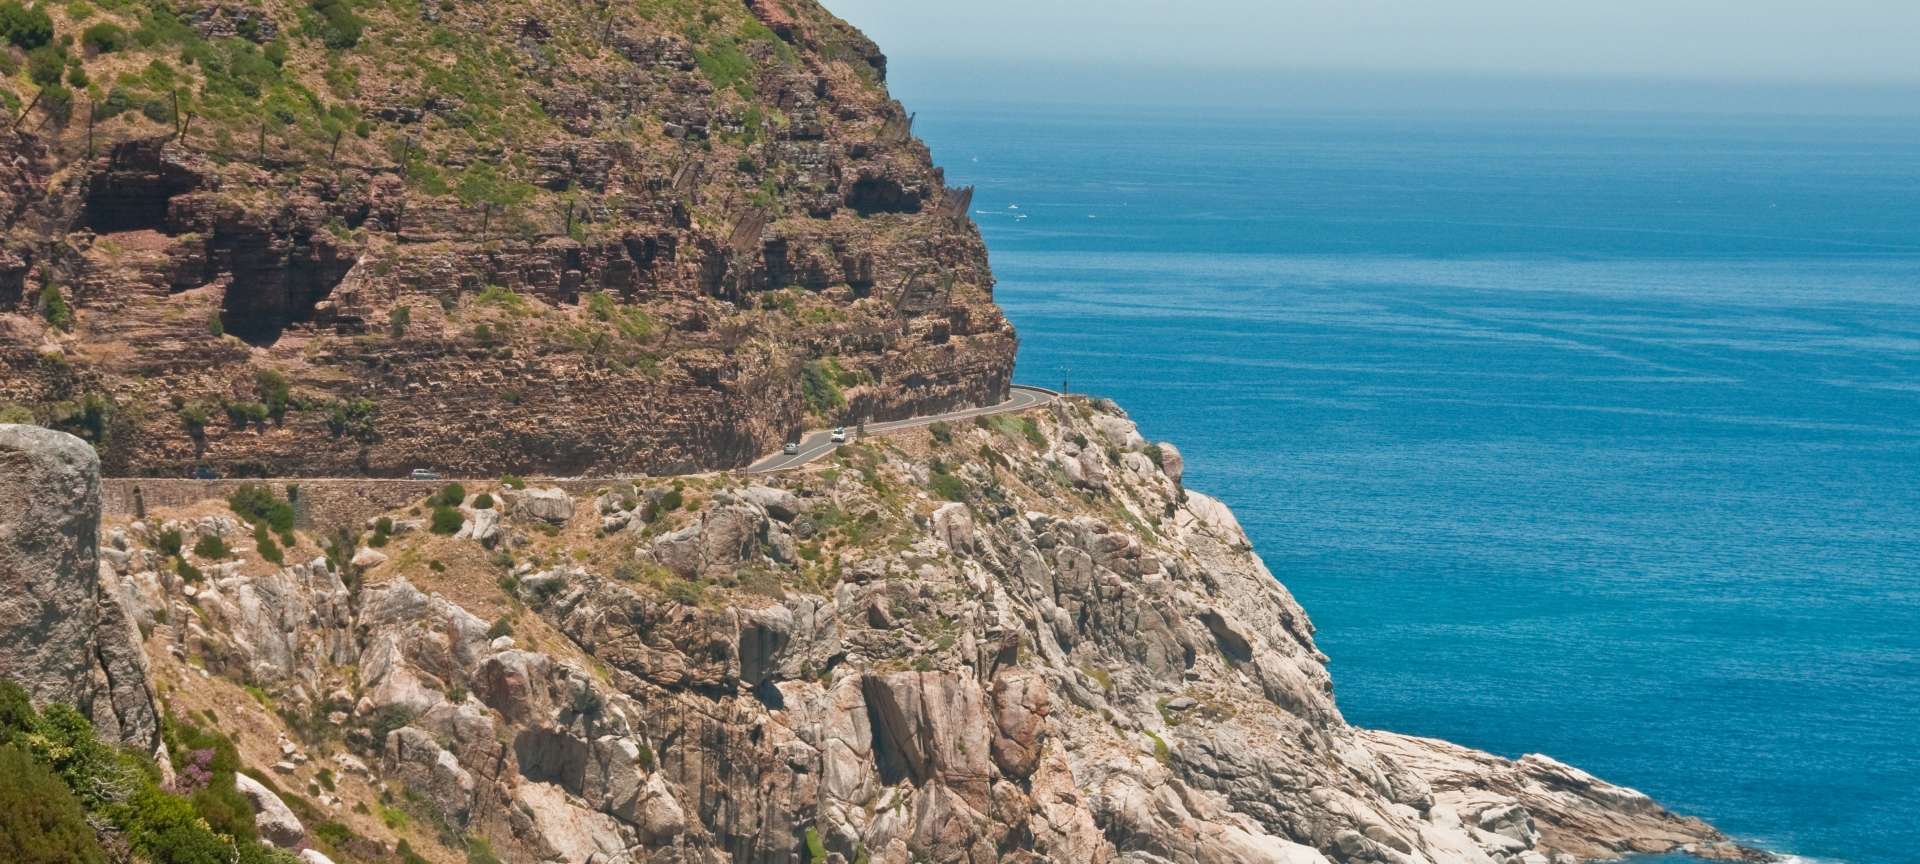 Chapmans Peak Drive is one of the World's most beautiful and connects the towns of Hout Bay and Noordhoek.